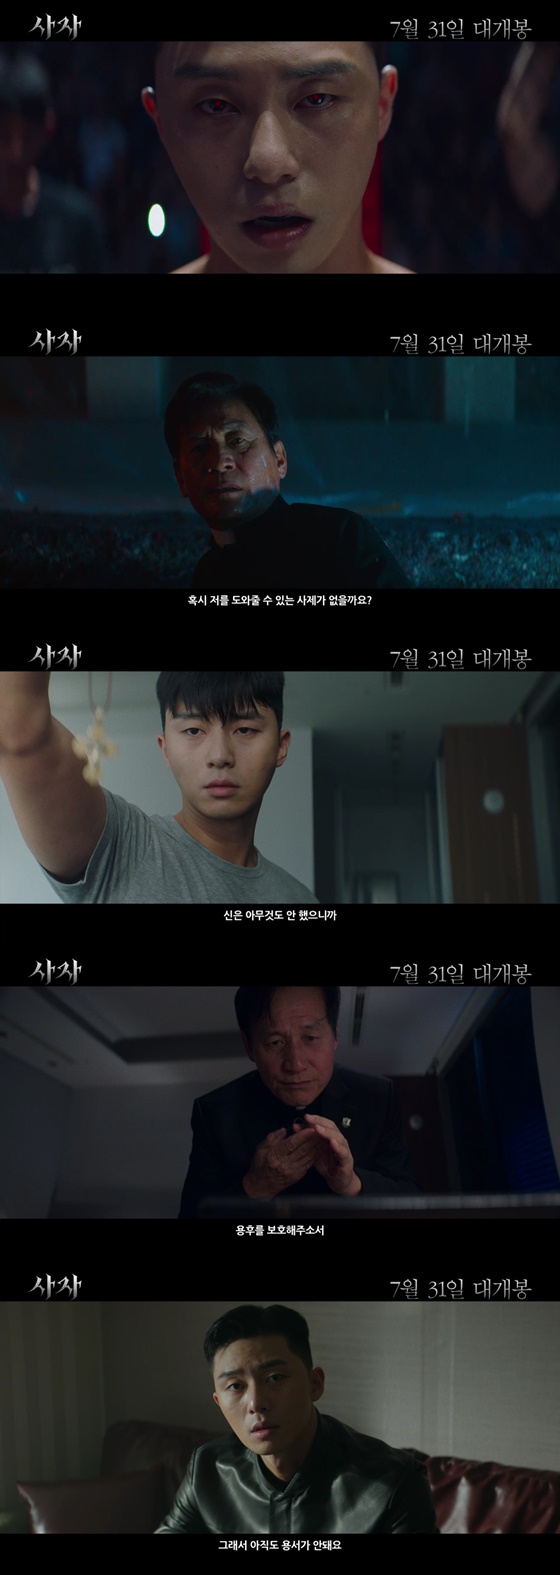 On the 17th, Lion released the third poster and the third trailer with intense visual and explosive tension.Lion is a story about fighting champion Yonghu (Park Seo-joon) meeting the Guma priest Anshinbu (An Sung-ki) and confronting the powerful evil (), which has confused the world.Park Seo-joon, a martial arts champion who faces evil (the evil) in the third poster, is curious about the exciting development and powerful action in the movie with the face and charismatic eyes that have left behind the wound.Here, the copy of Will you stand on the side of evil or against evil is curious about the huge clash of good and evil in the real world in the movie.The overwhelming presence of the three characters surrounding such powerful evil is raising expectations for the movie.The trailer, released with the third Poster, begins with the childhood of the martial arts champion Yonghu.After losing his father in an accident of injustice, the meeting of the priest Anshin, who has been confronted with the distrust of the world, the hatred of God, and the evil hidden in the world, stimulates interest with the new setting that has never been before.The image of Yonghu, who confronts powerful boomers with the copy Gods Lion against evil comes, will give an intense impact with explosive action and special activity.Especially, the explosive confrontation between Yonghu and Black Bishop Jishin, which became the Lion of God, raised the expectation of the movie, and the flame rising like a flame in the hands of Yonghu predicted the original action of Lion which added fantasy imagination.Meanwhile, Lion will be released on the 31st.